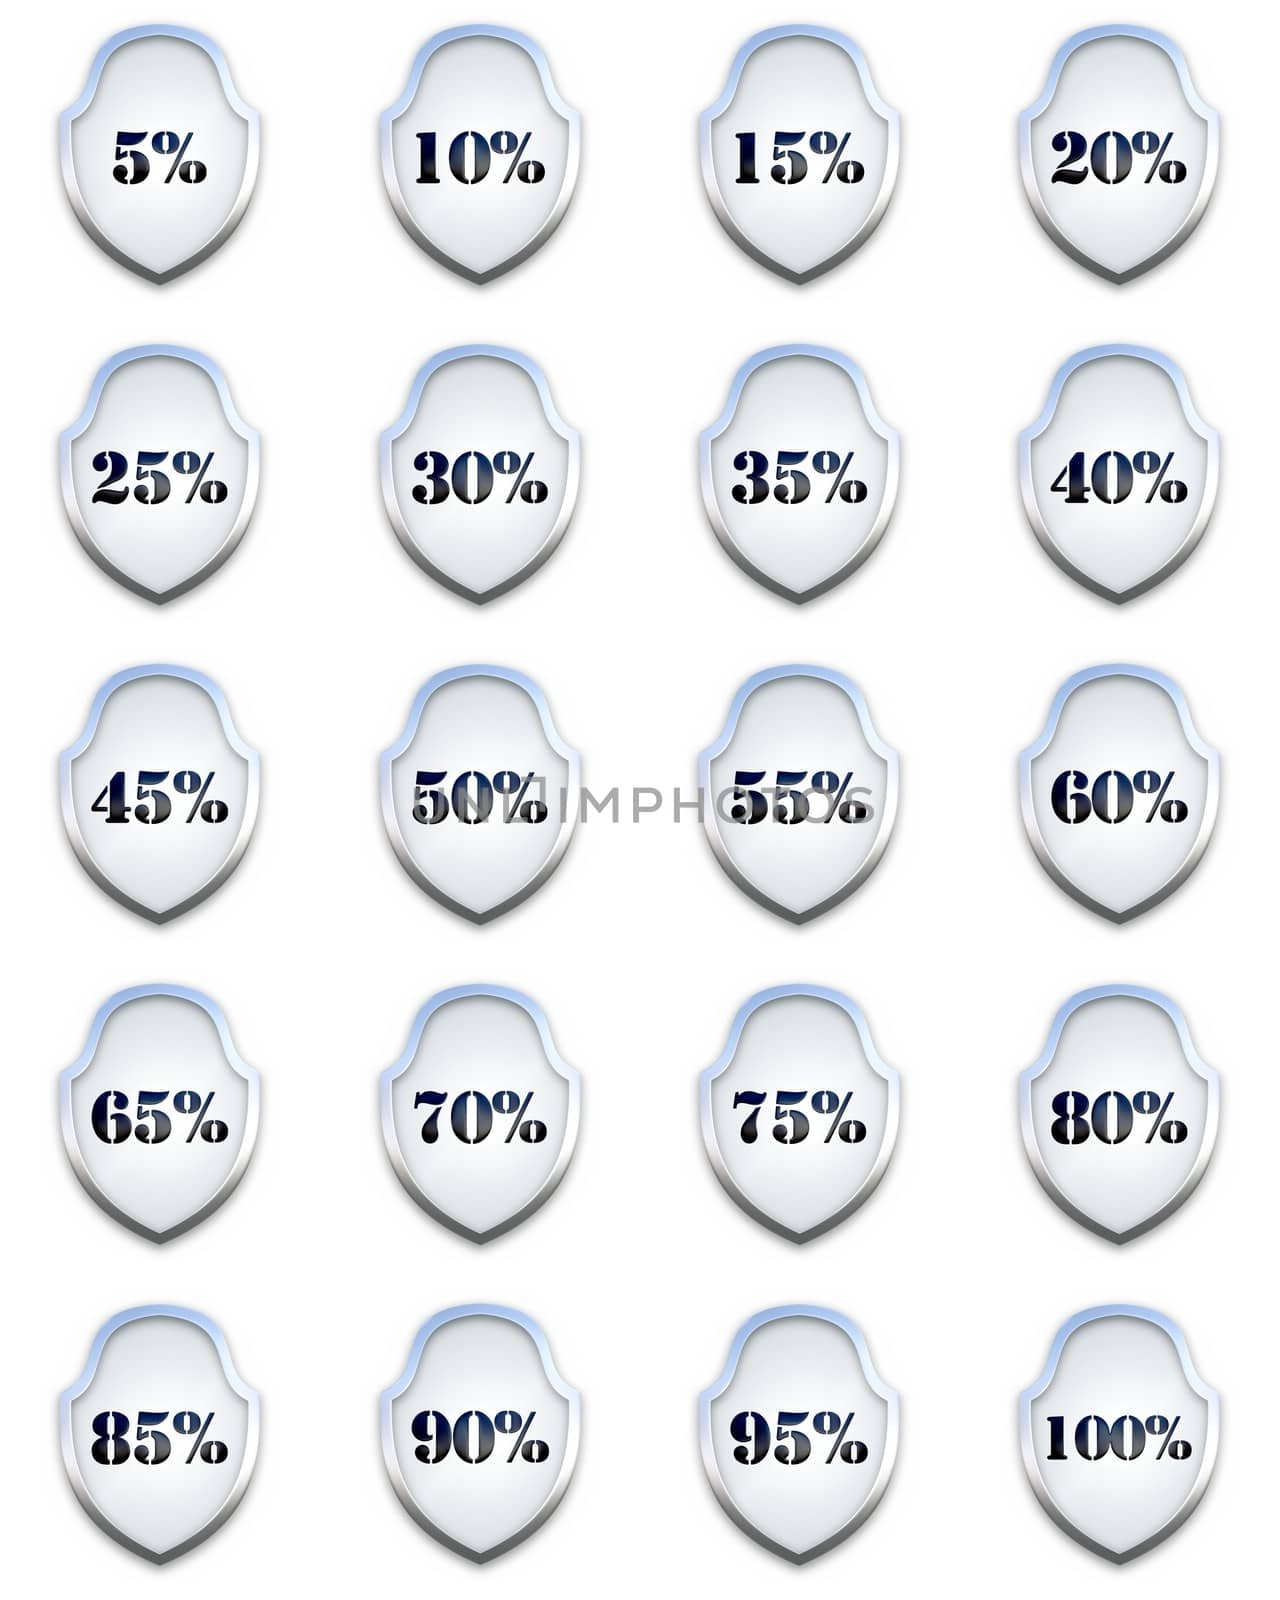 Illustration of 20 shields with percentages